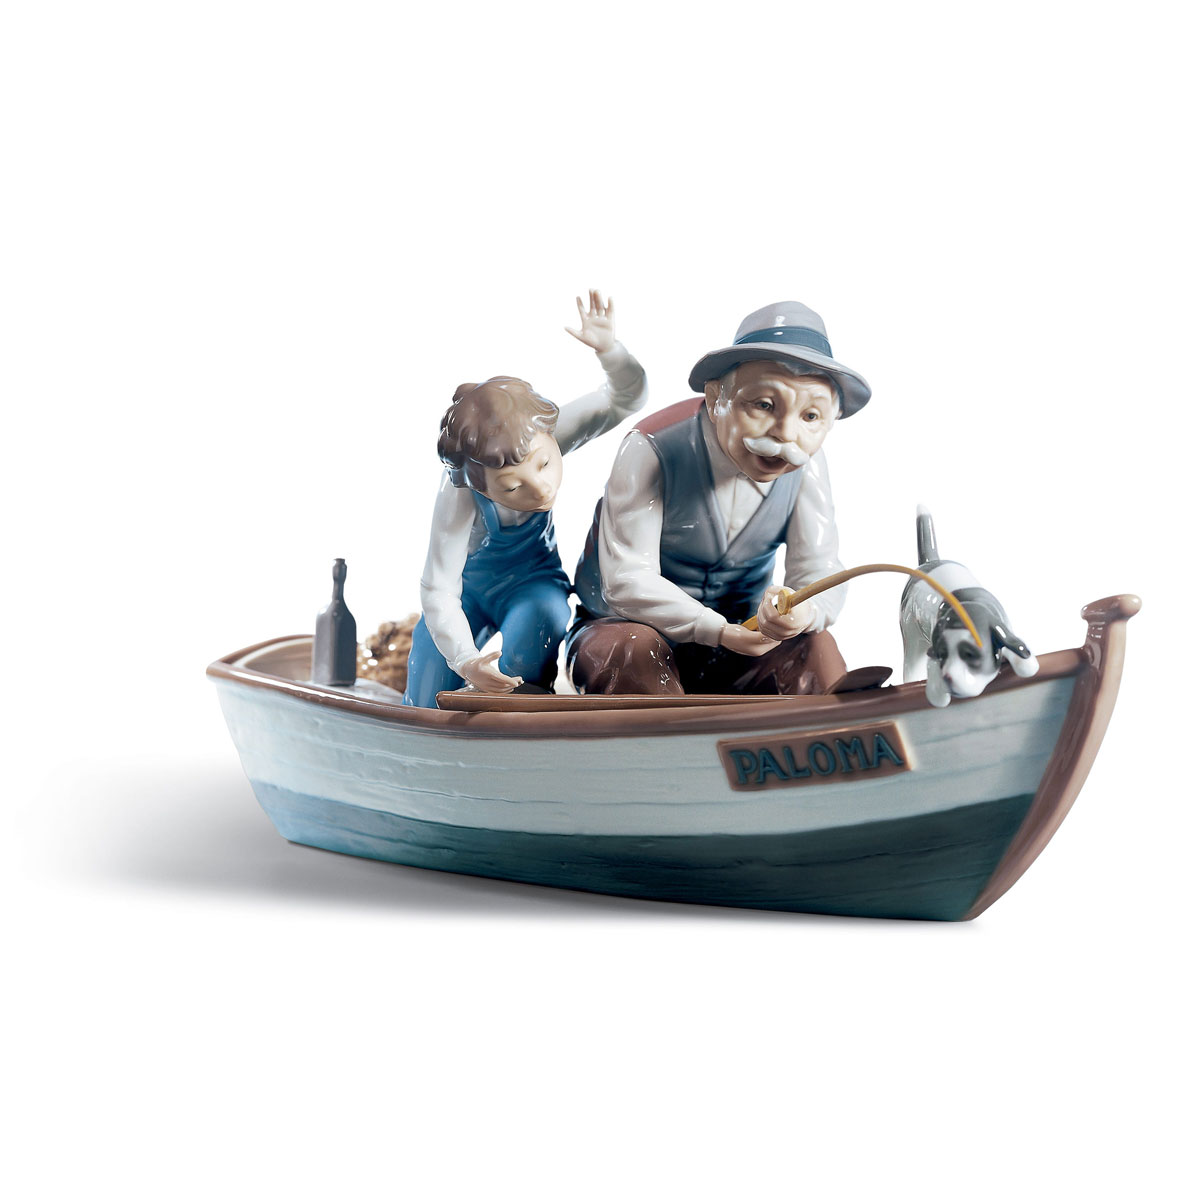 Lladro Classic Sculpture, Fishing With Gramps Figurine